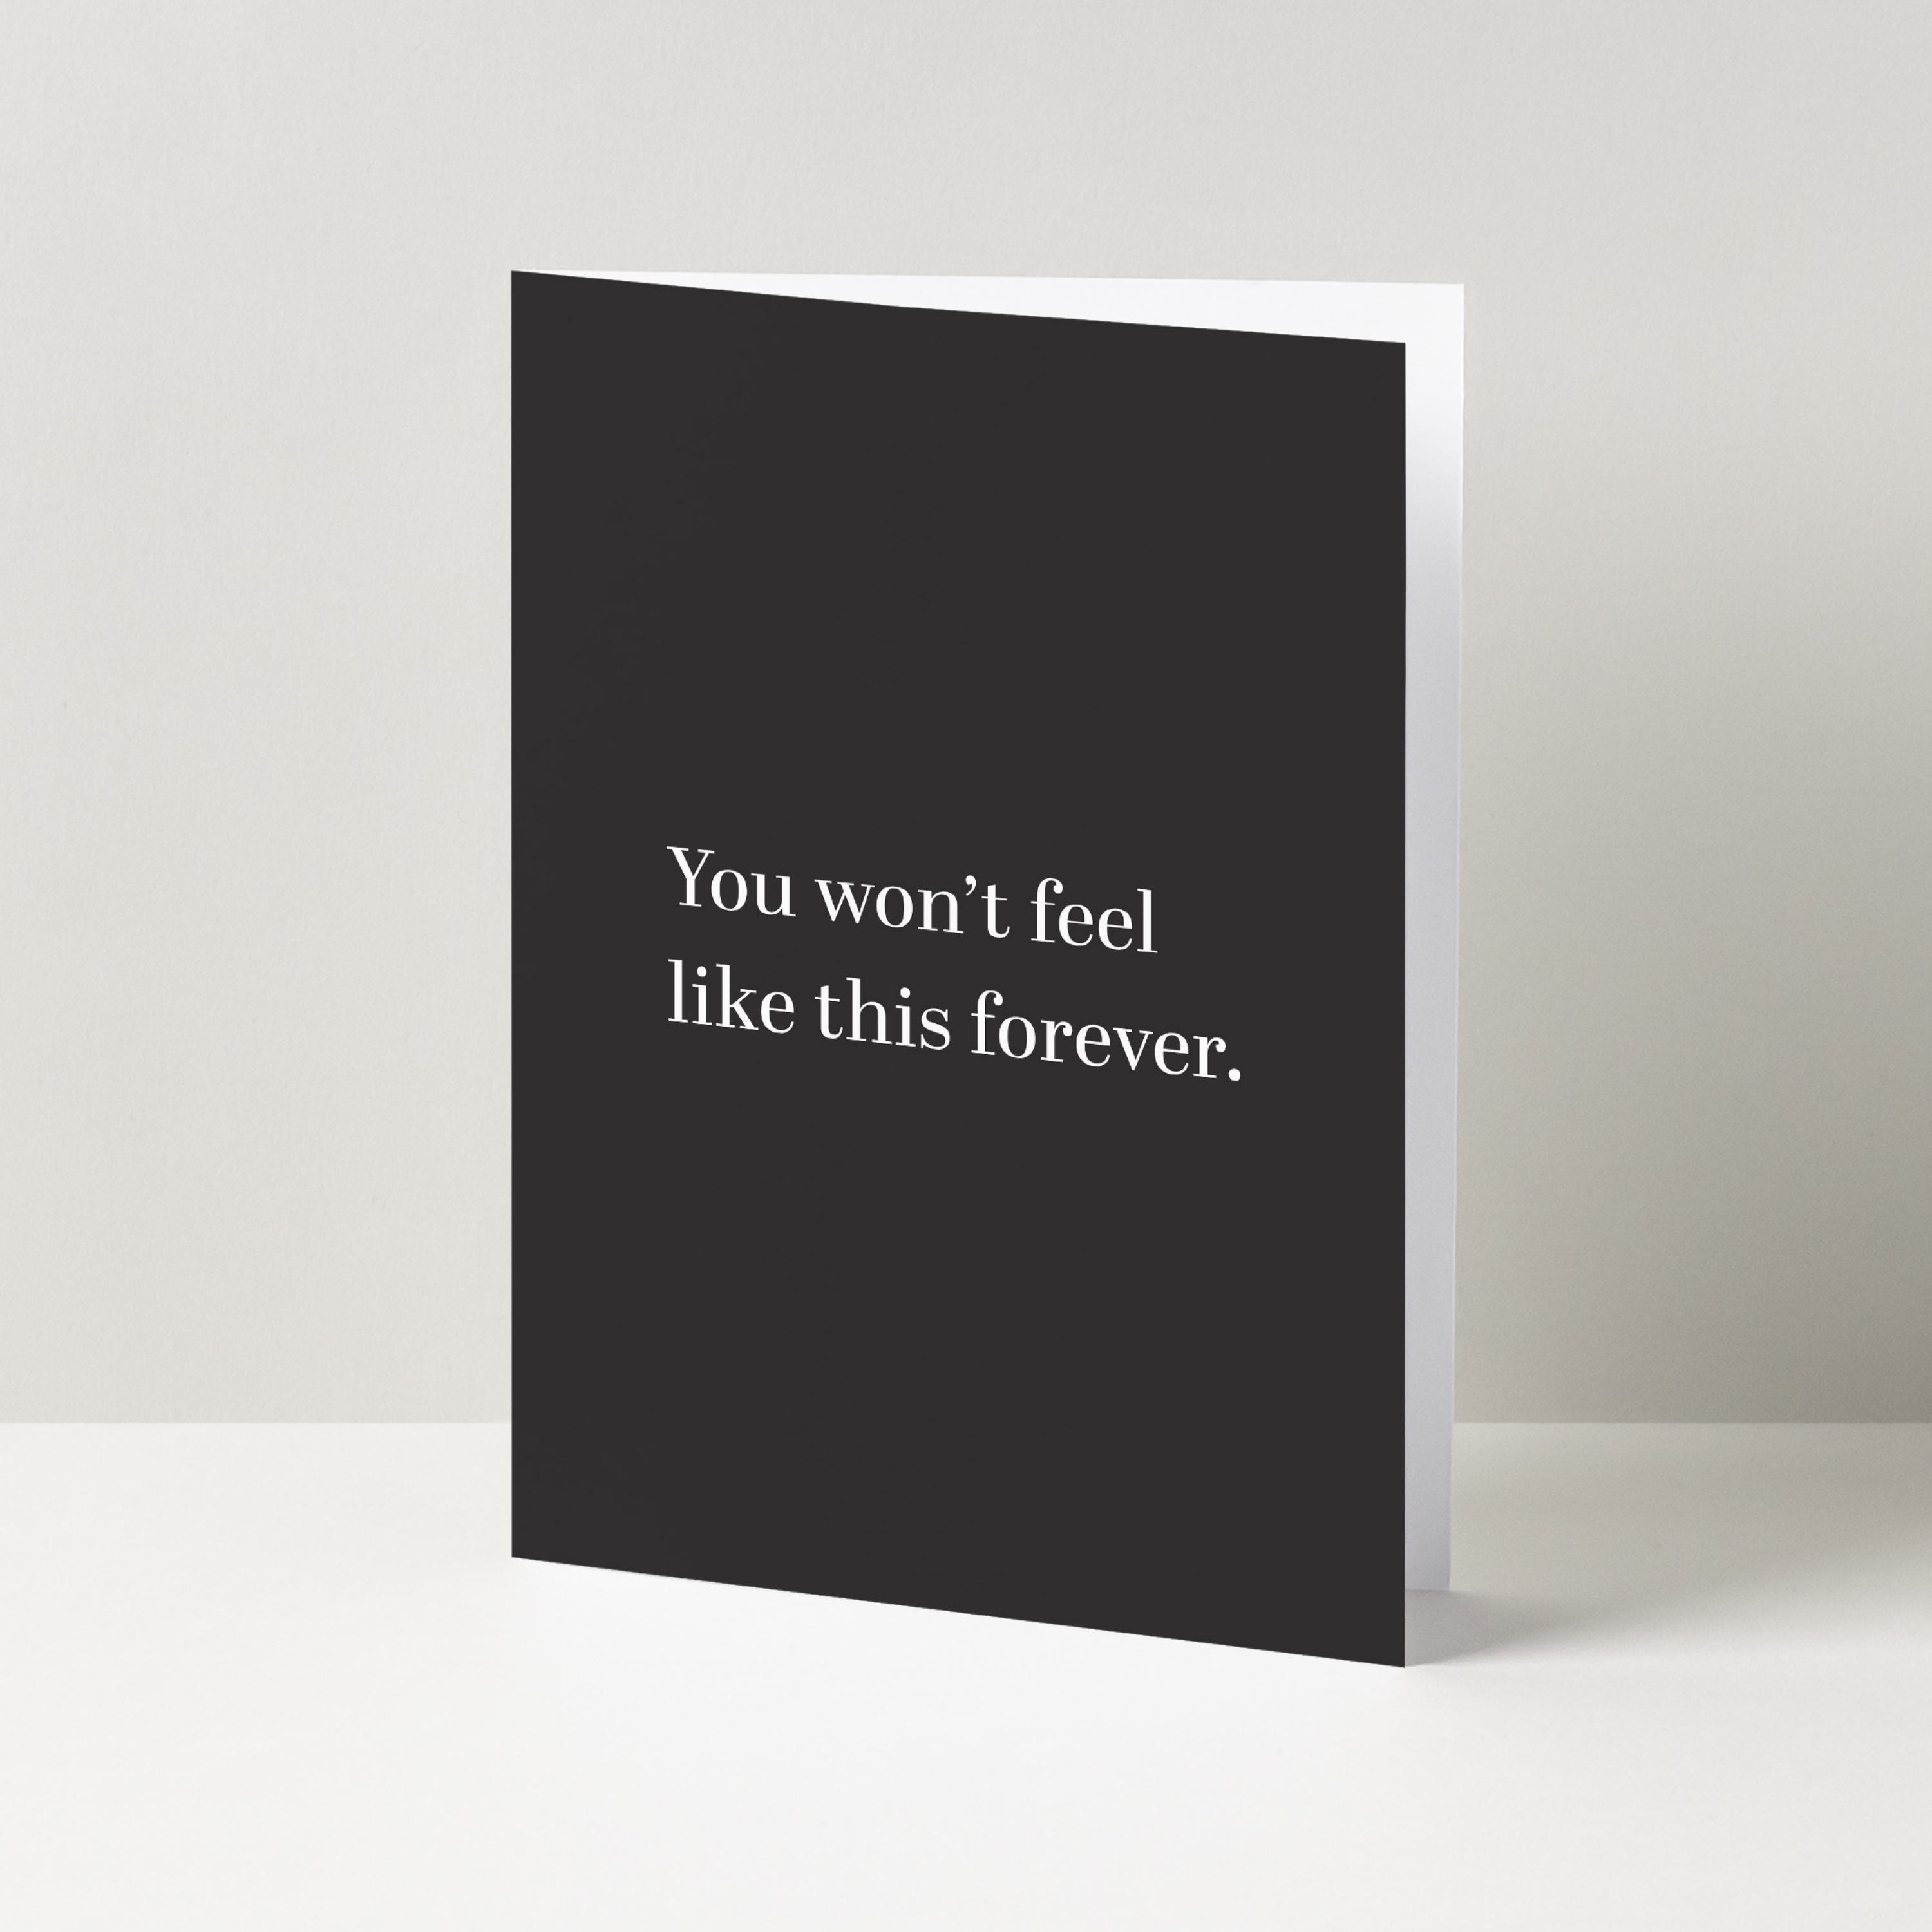 Vertical black card with the words "You won't feel like this forever" in a serif white font.